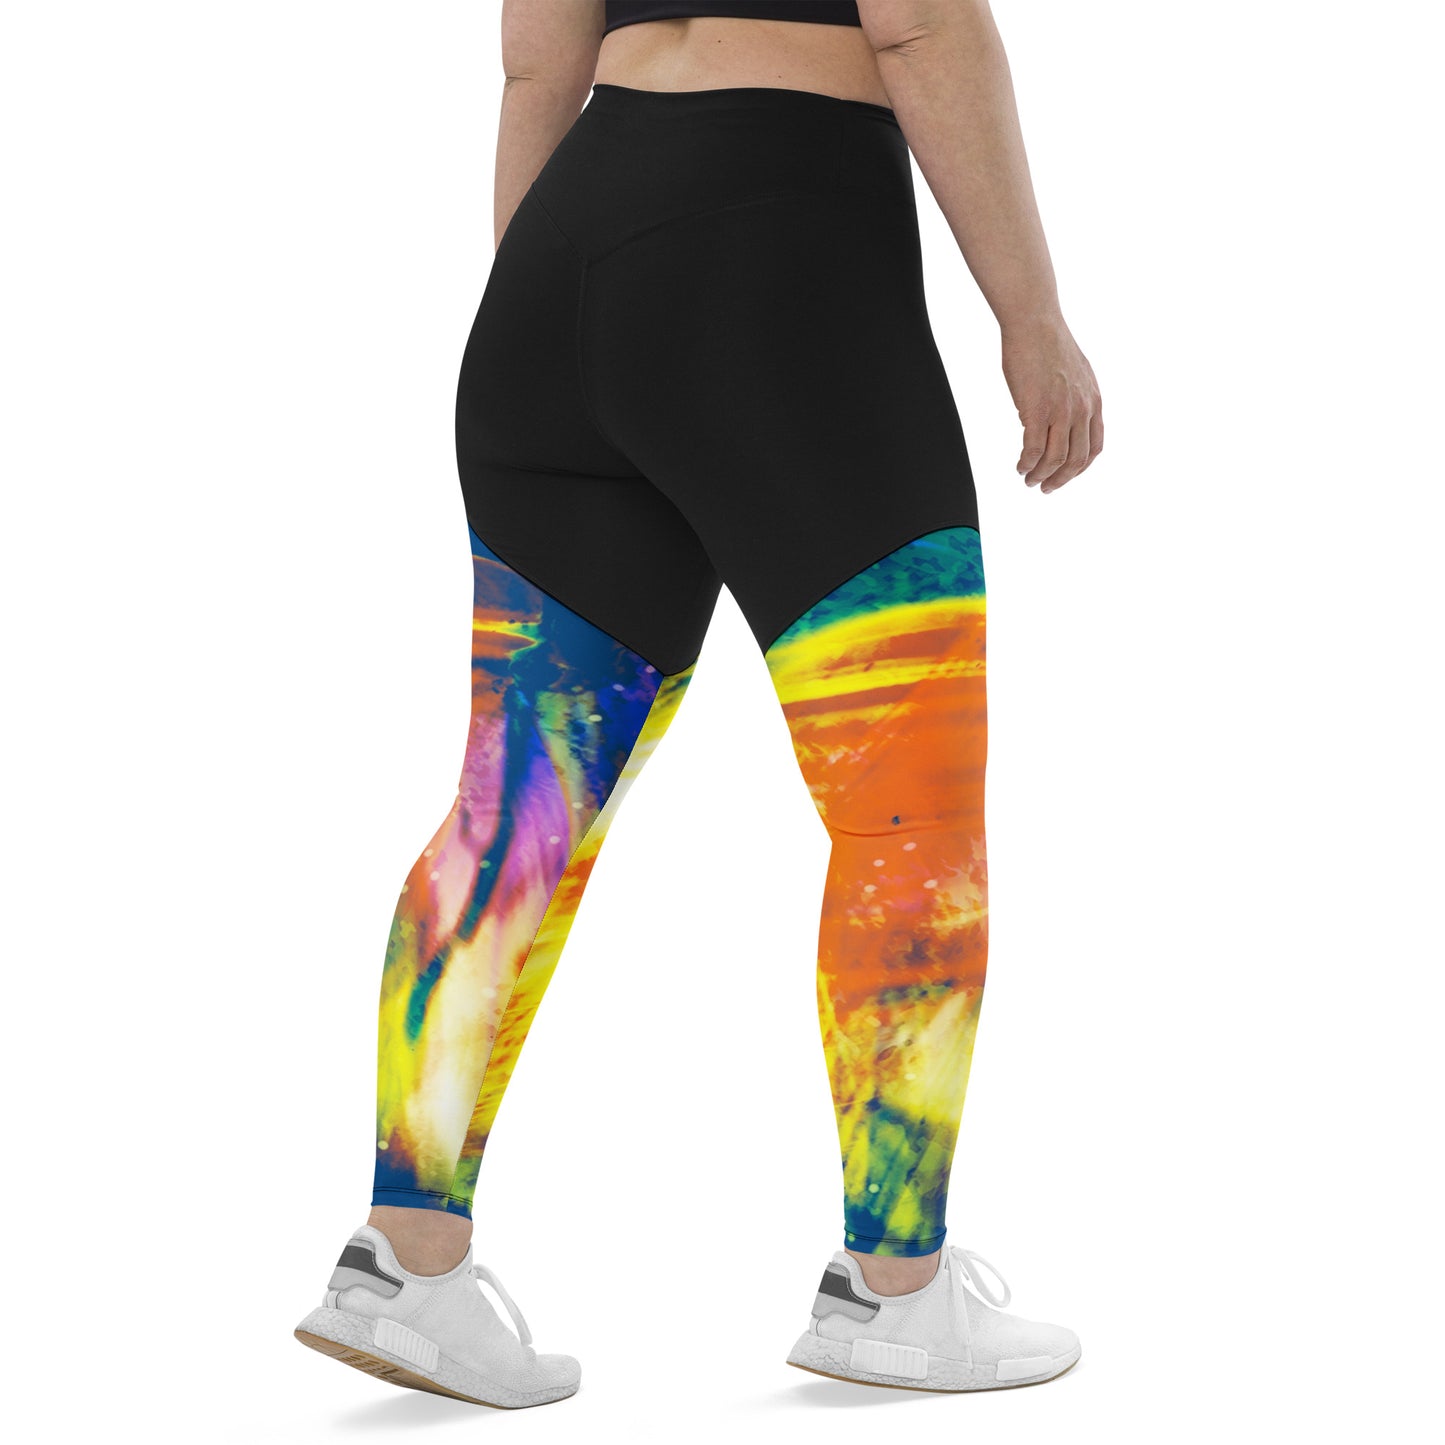 America’s Swag 312 Abstract Sports Leggings